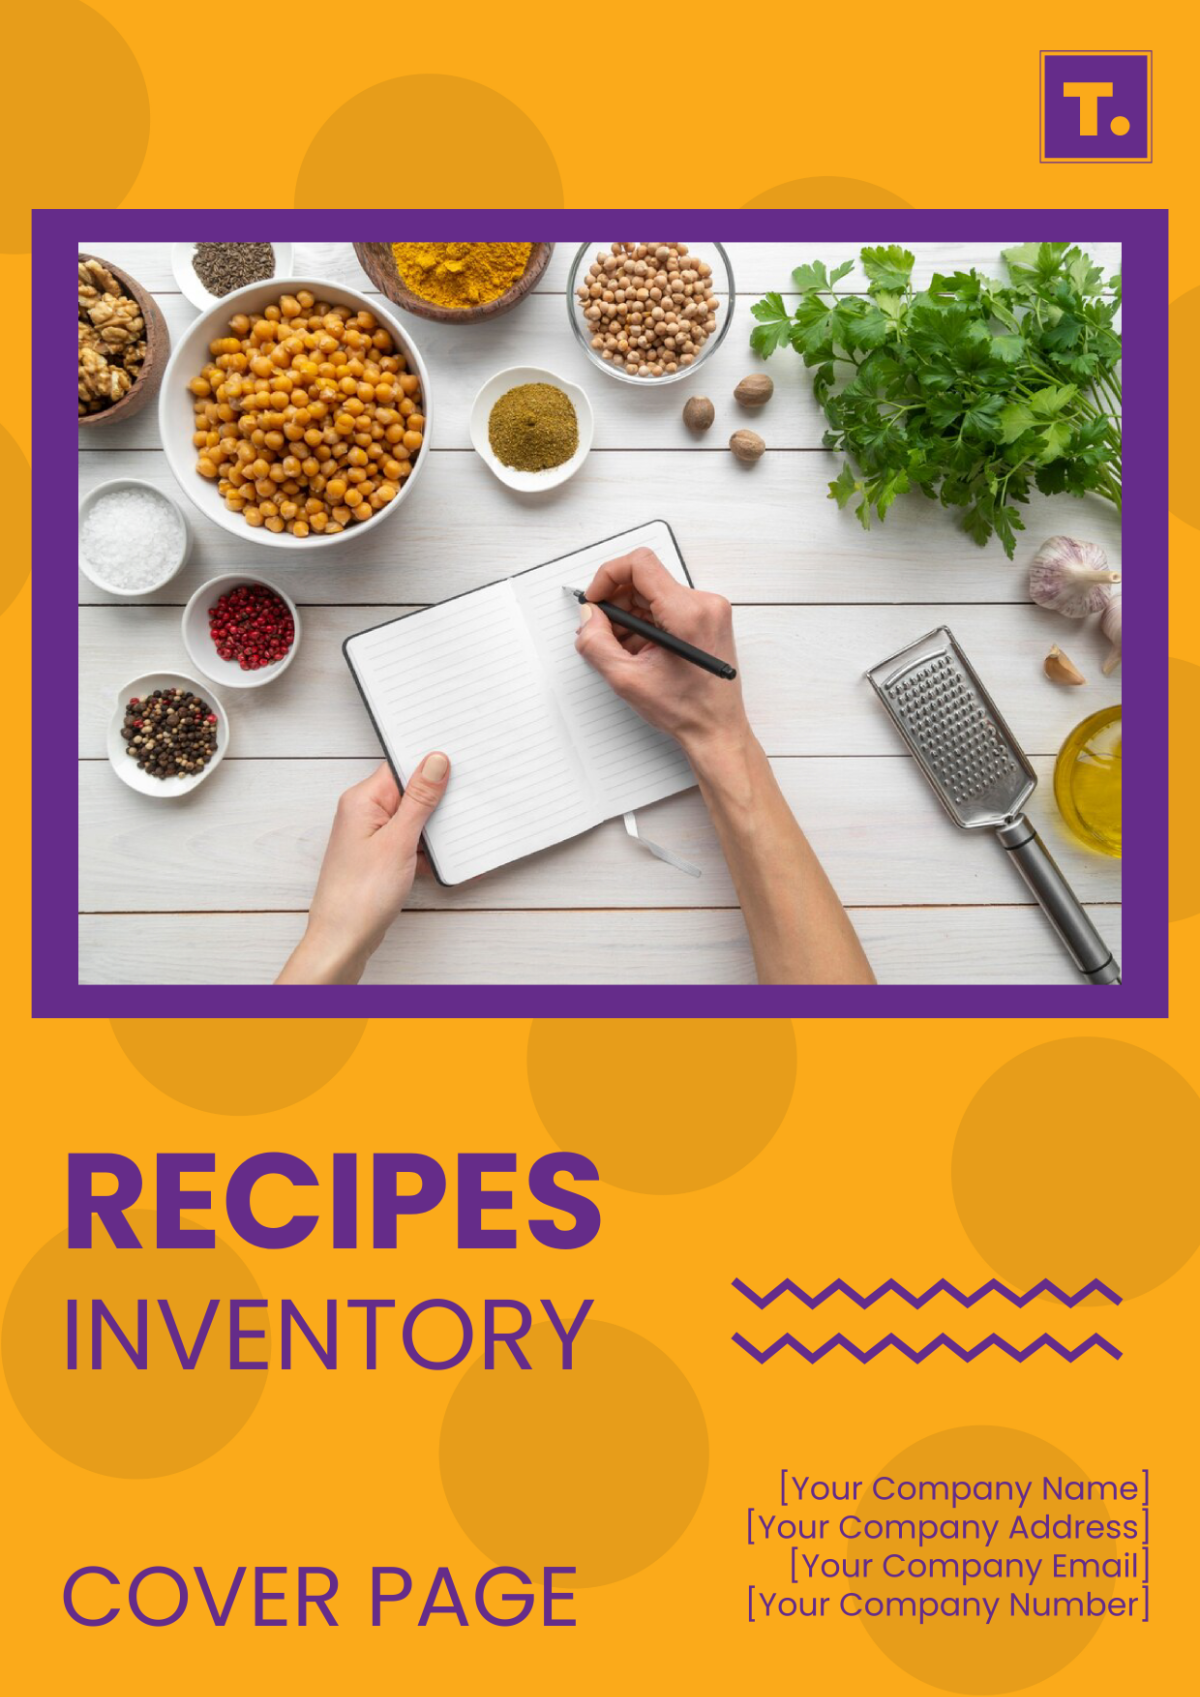 Recipes Inventory Cover Page